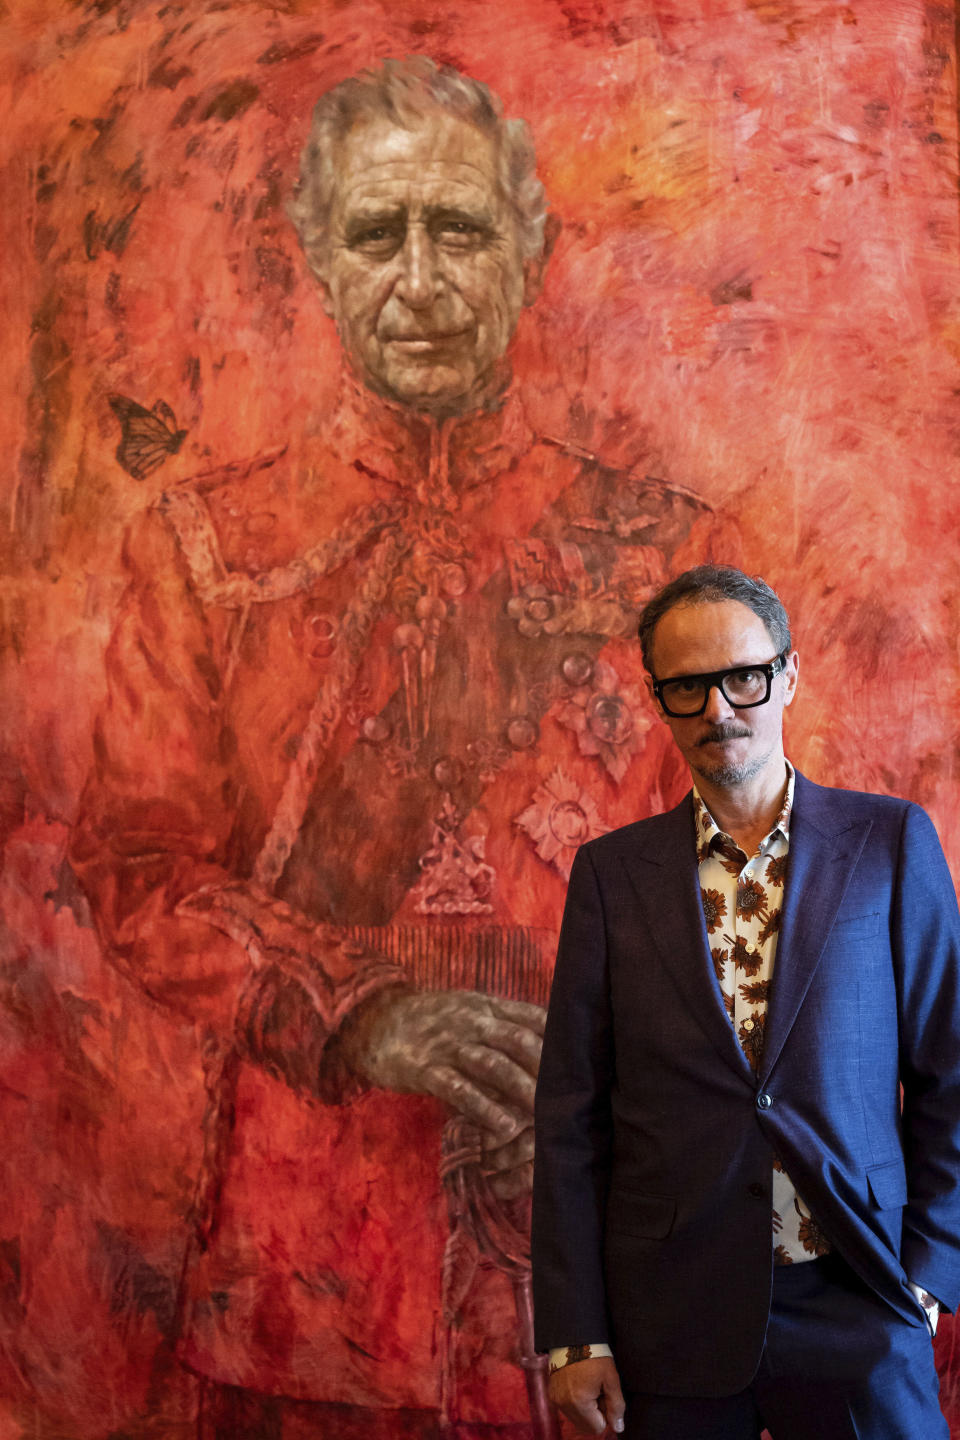 Artist Jonathan Yeo, at the unveiling of artist Jonathan Yeo's portrait of the King, in the blue drawing room at Buckingham Palace, in London, Tuesday May 14, 2024. The portrait was commissioned in 2020 to celebrate the then Prince of Wales's 50 years as a member of The Drapers' Company in 2022. The artwork depicts the King wearing the uniform of the Welsh Guards, of which he was made Regimental Colonel in 1975. The canvas size - approximately 8.5 by 6.5 feet when framed - was carefully considered to fit within the architecture of Drapers' Hall and the context of the paintings it will eventually hang alongside. (Aaron Chown/Pool Photo via AP)